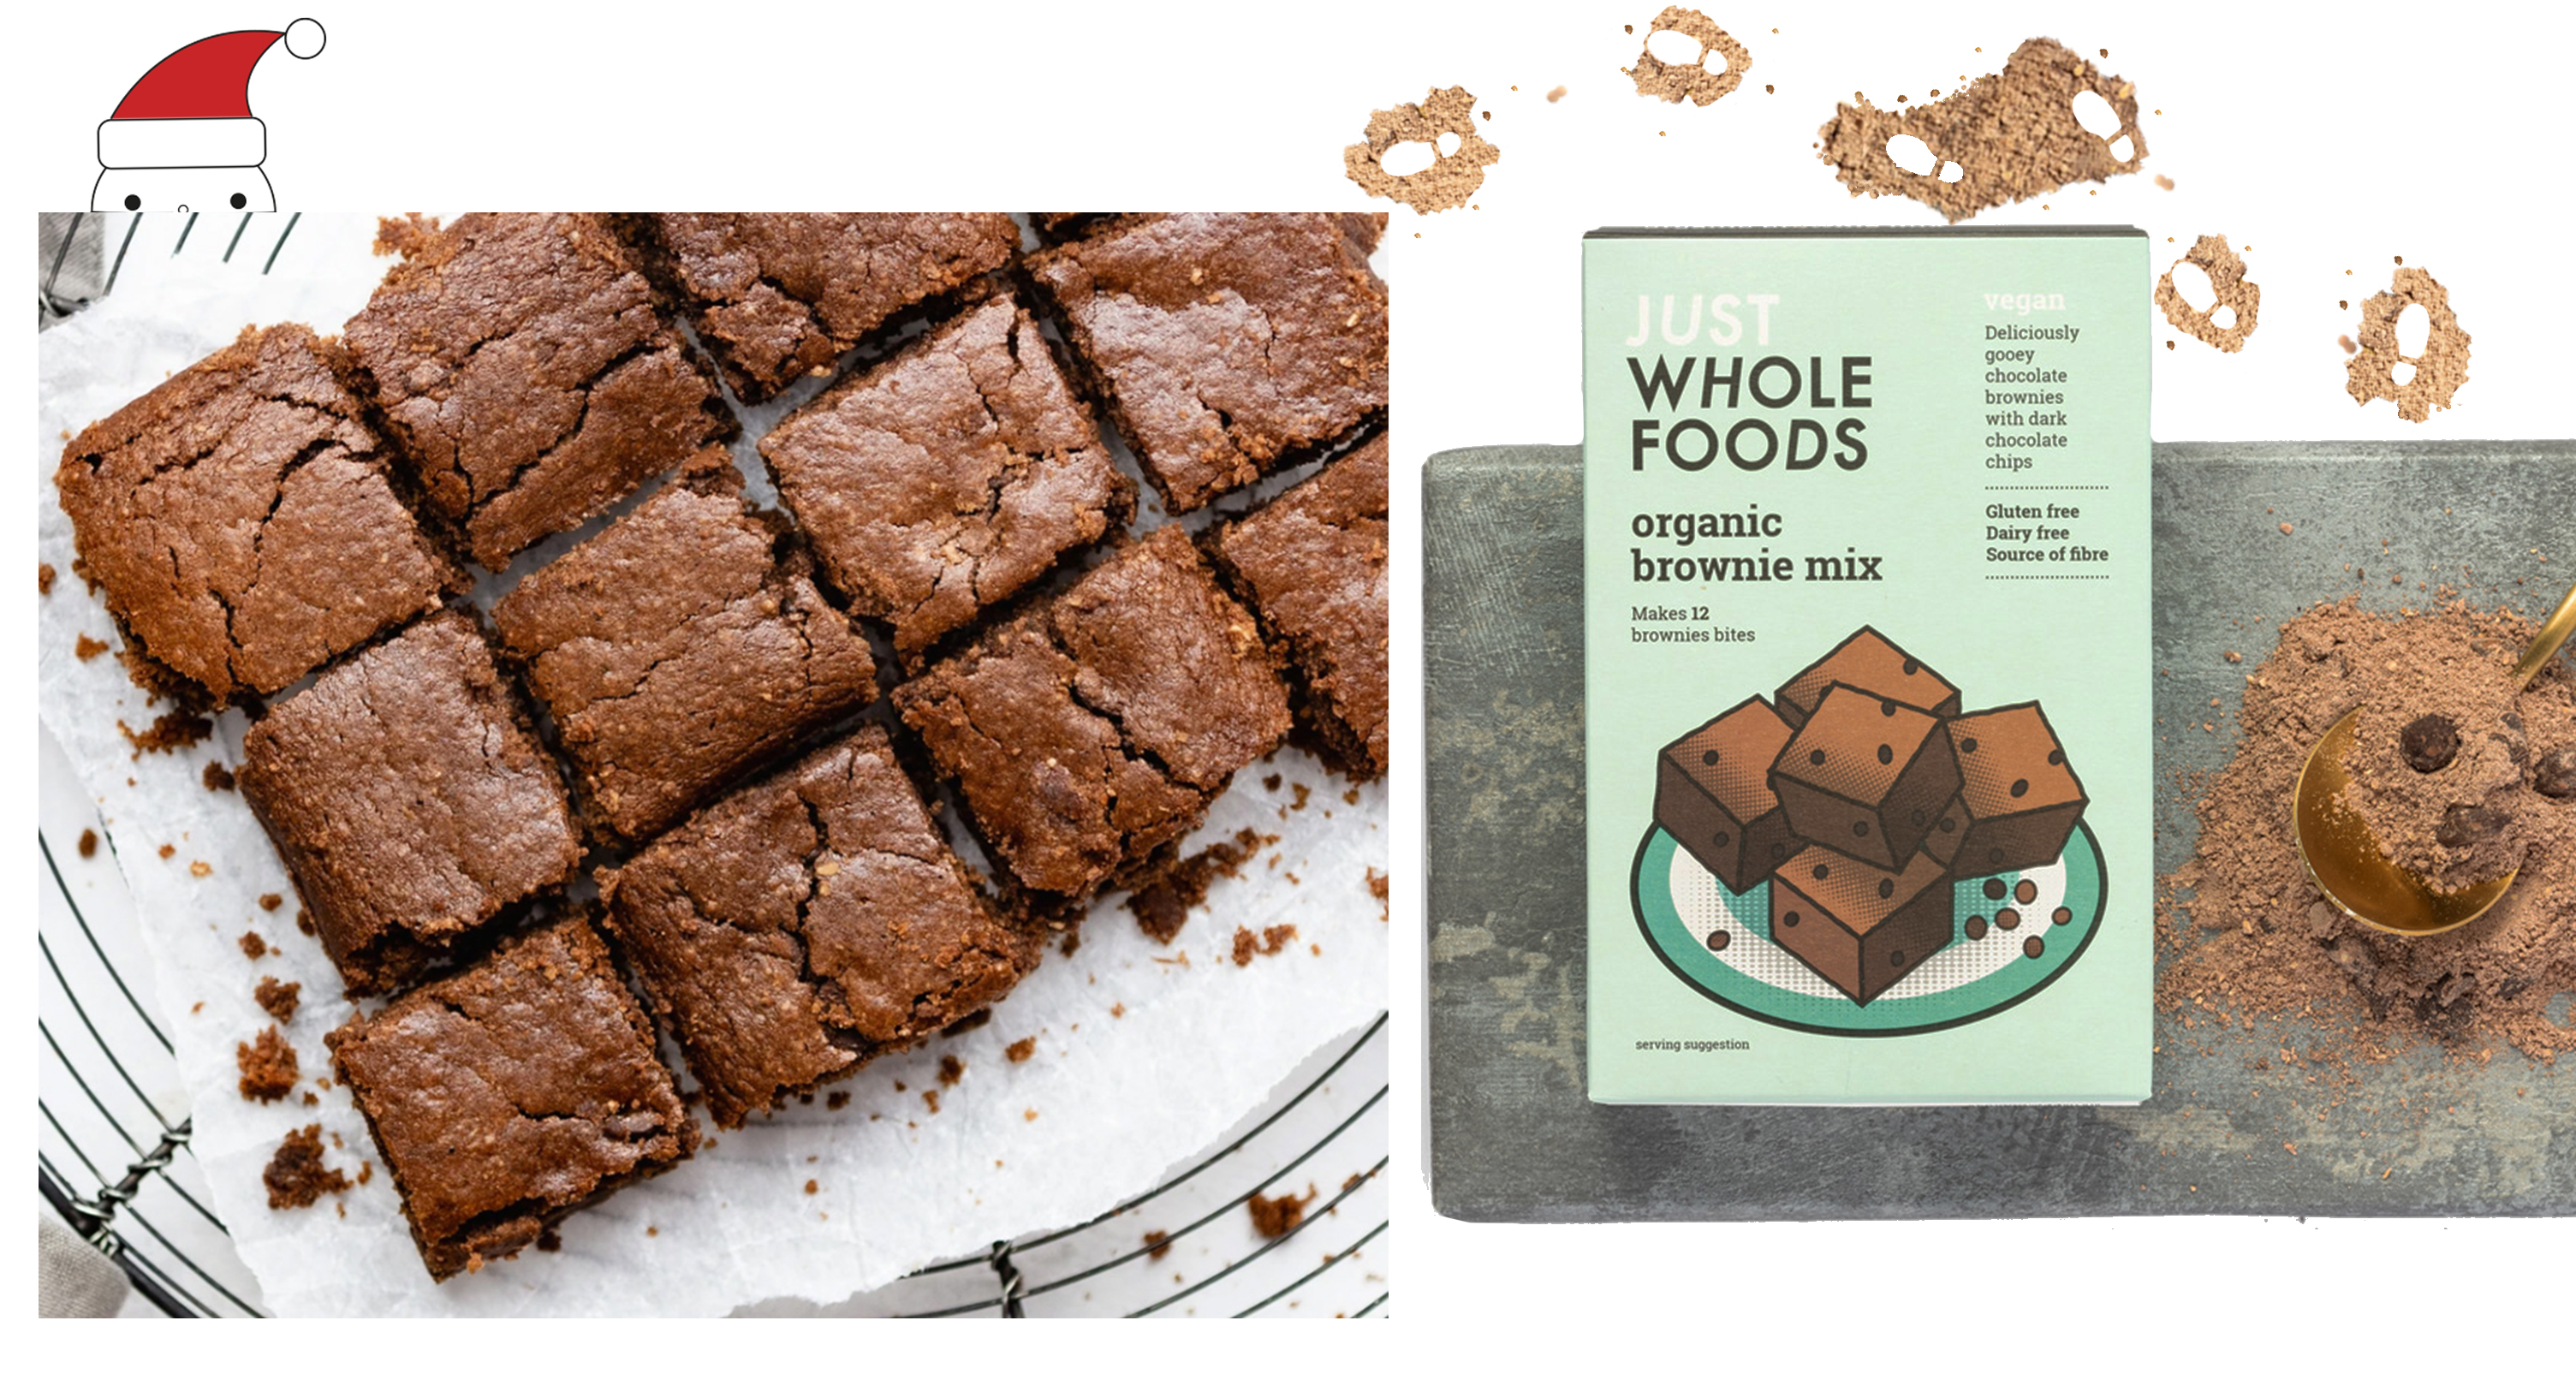 Organic Brownie Mix baked with brownies, chocolate powder footprints and a hiding santa for decoration